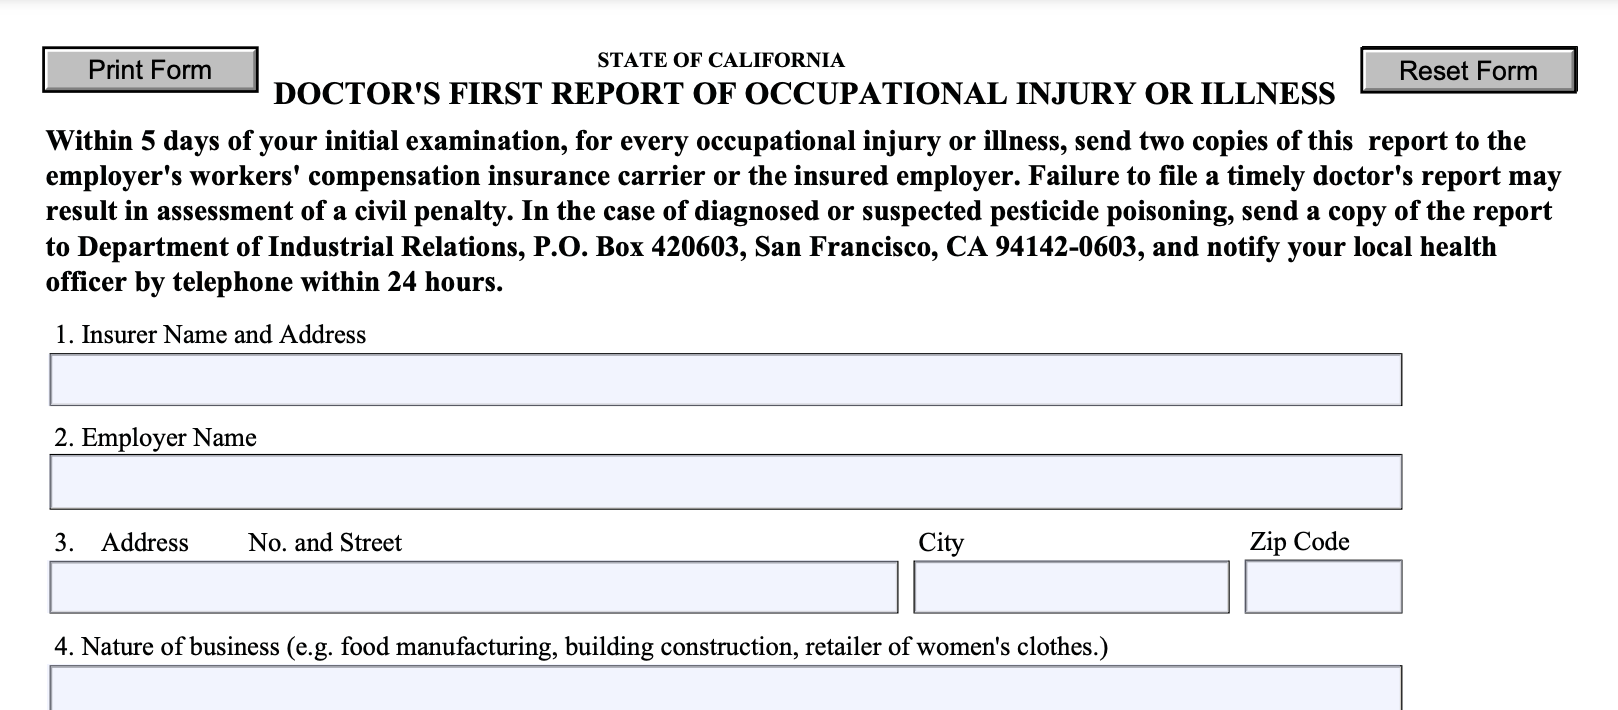 RateFast Definitions: California Doctor’s First Report of Occupational Injury or Illness (DFR)